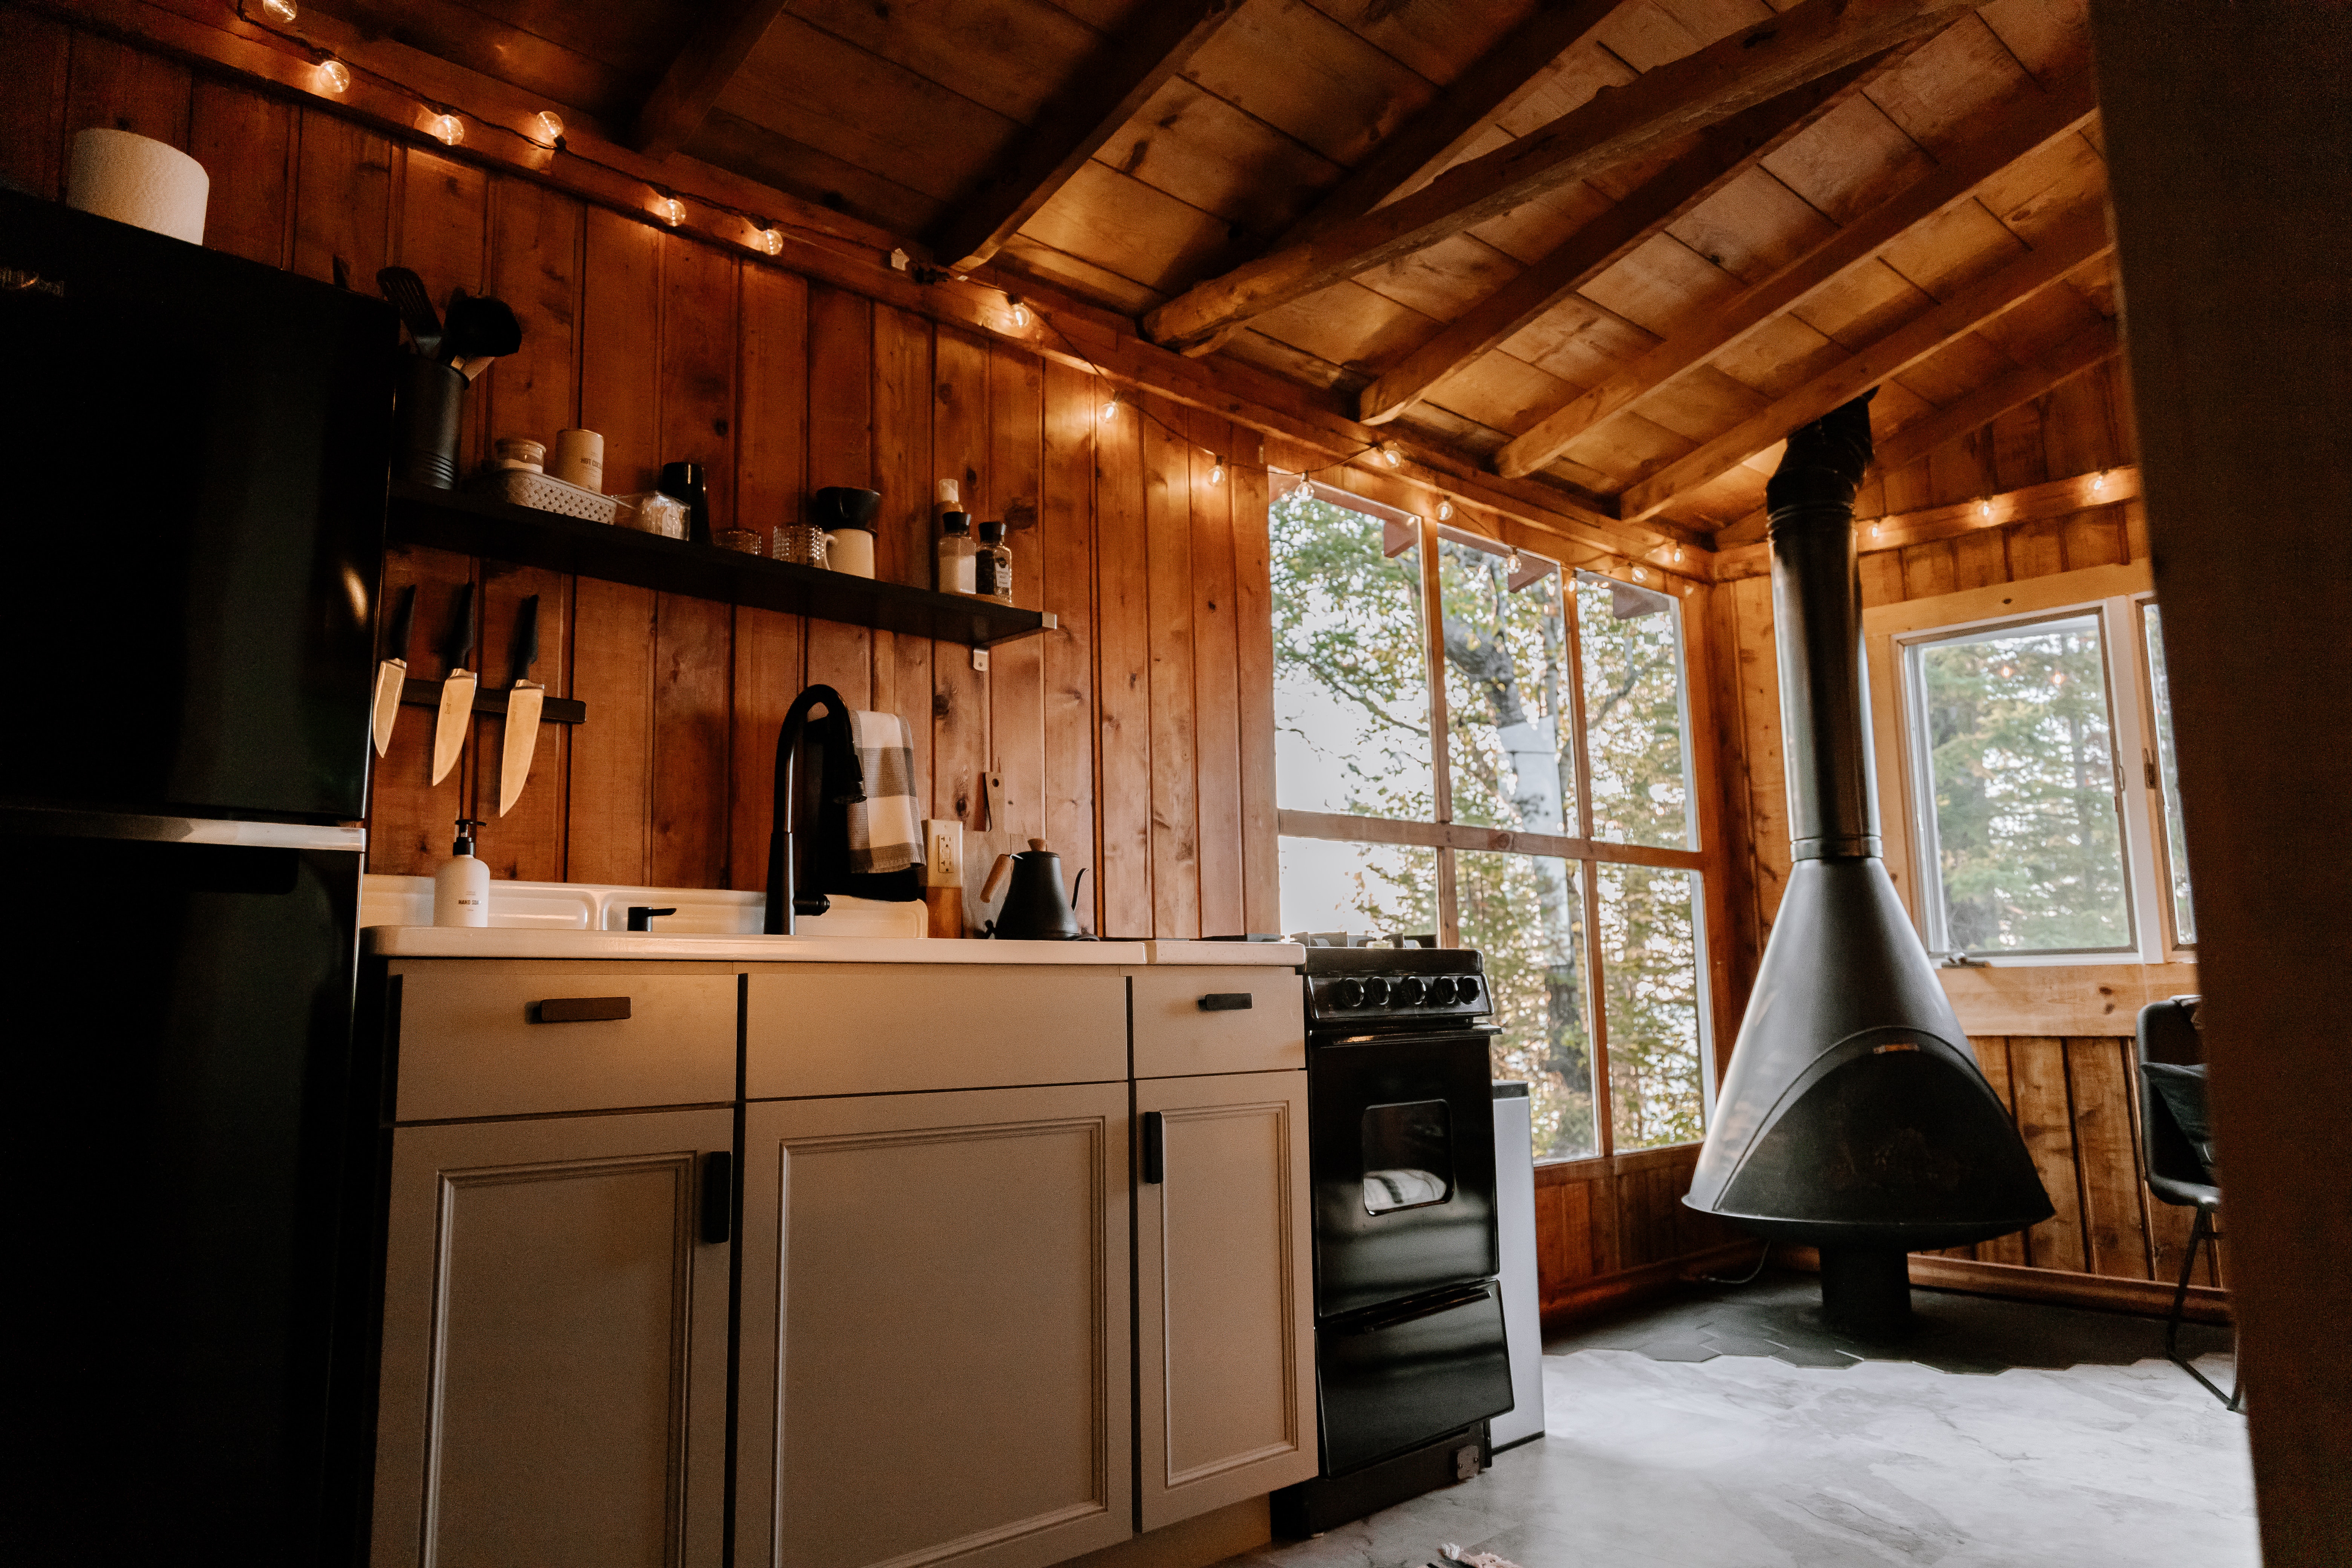 A wooden kitchen with a stove top oven next to a window and cove lighting